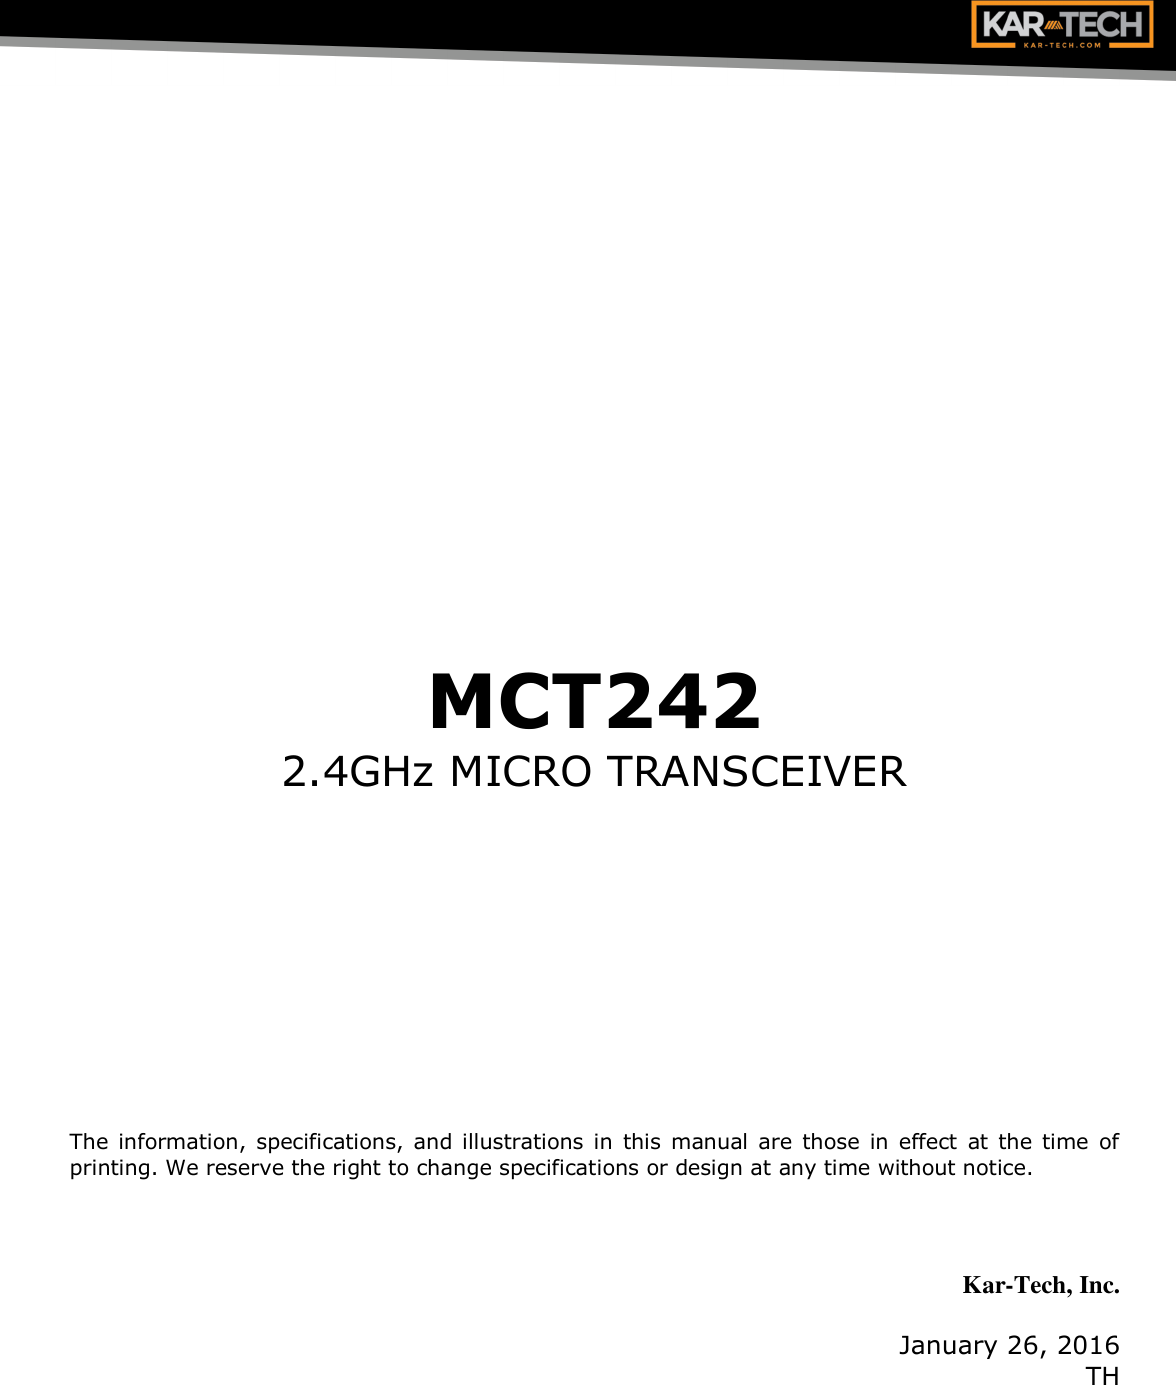        MCT242 2.4GHz MICRO TRANSCEIVER            The information, specifications, and illustrations in  this manual  are those in effect at  the time of printing. We reserve the right to change specifications or design at any time without notice.    Kar-Tech, Inc.  January 26, 2016 TH 